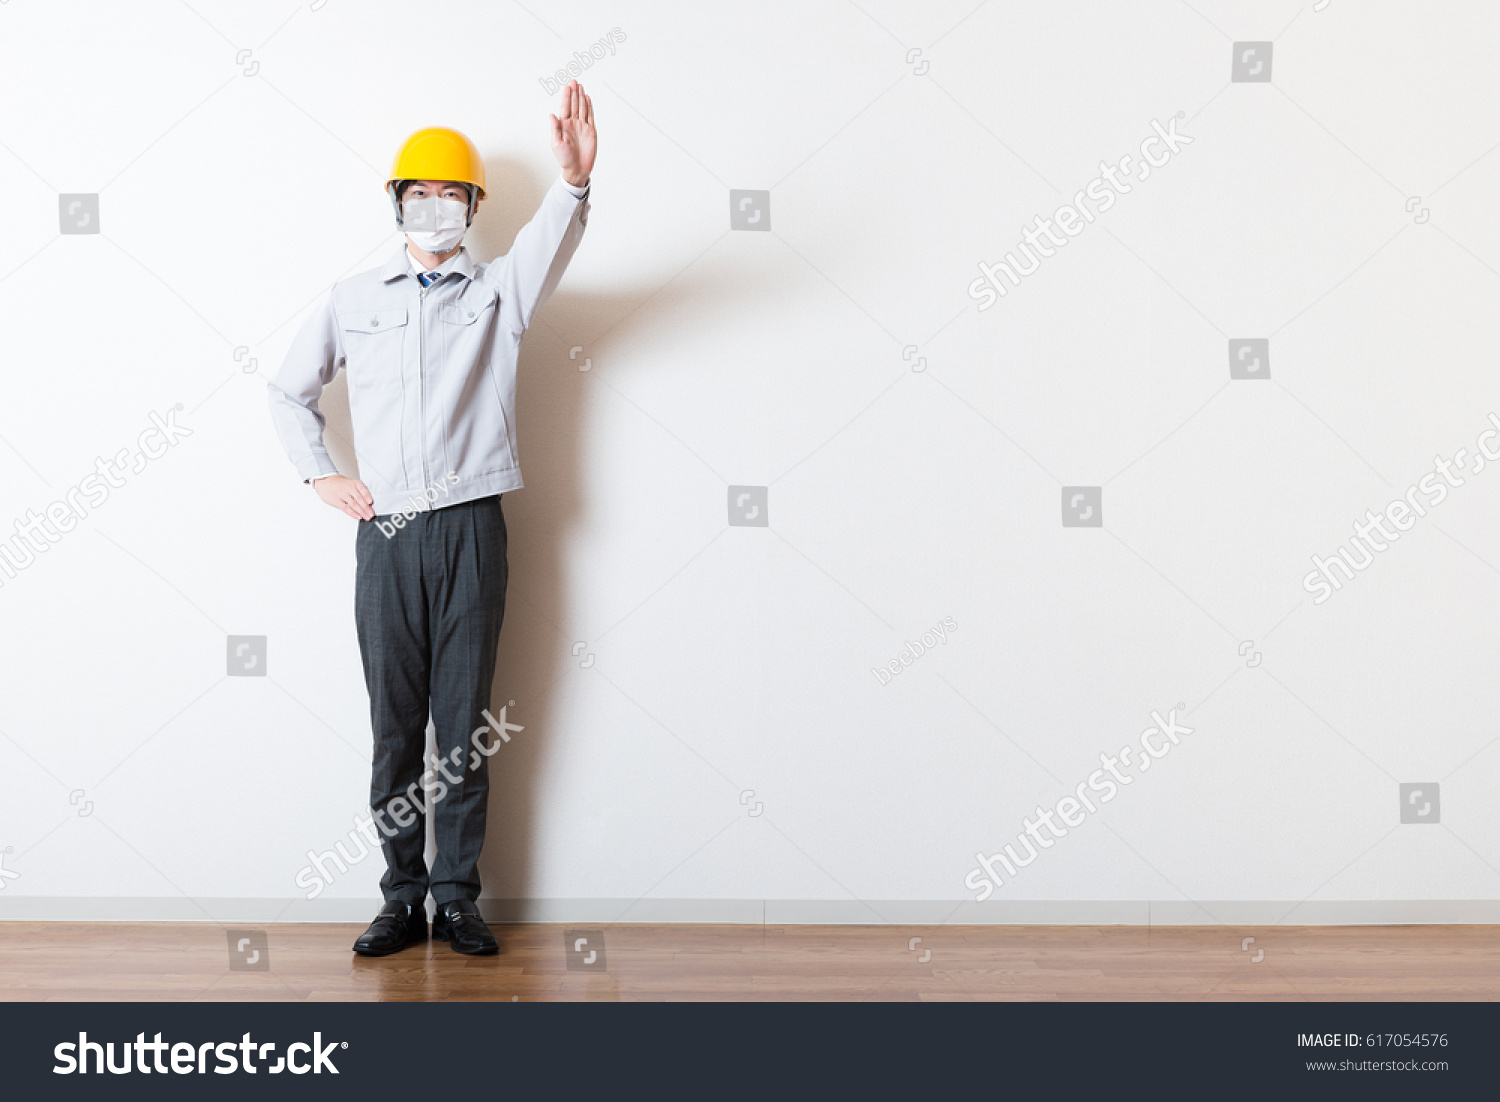 Men standing wearing work clothes with a white background #617054576